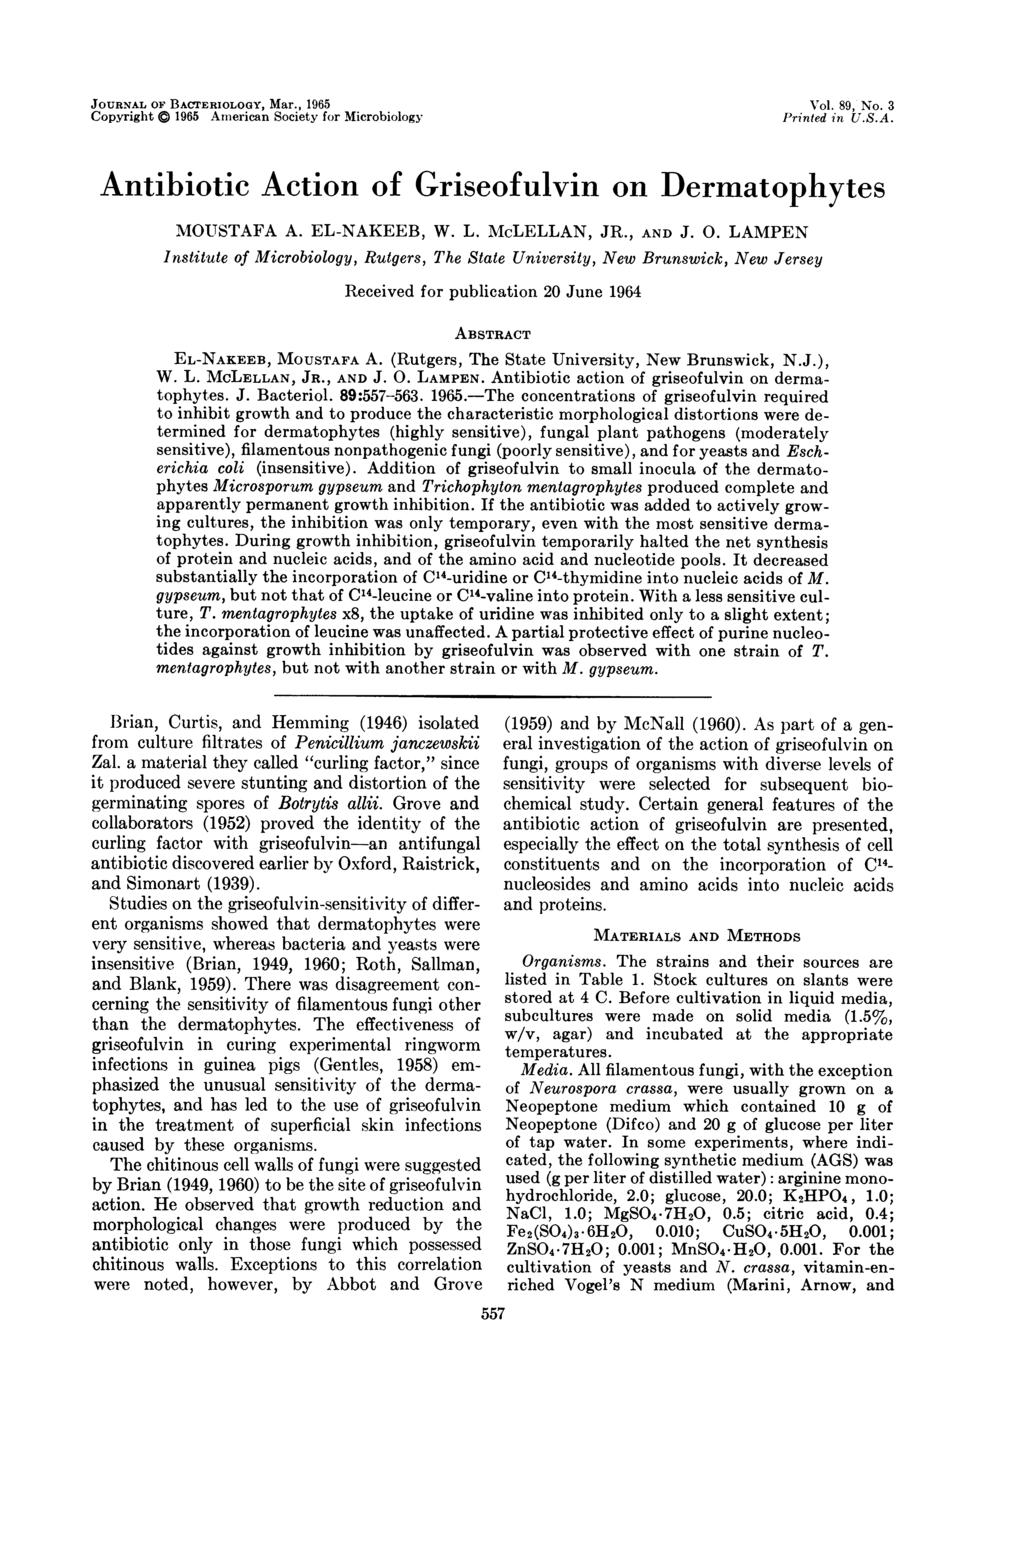 JOURNAL of BACTERIOLOGY, Mar., 1965 Copyright g 1965 American Society for Microbiology Vol. 89, No. 3 Printed in U.S.A. Antibiotic Action of Griseofulvin on Dermatophytes MOUSTAFA A. EL-NAKEEB, W. L.